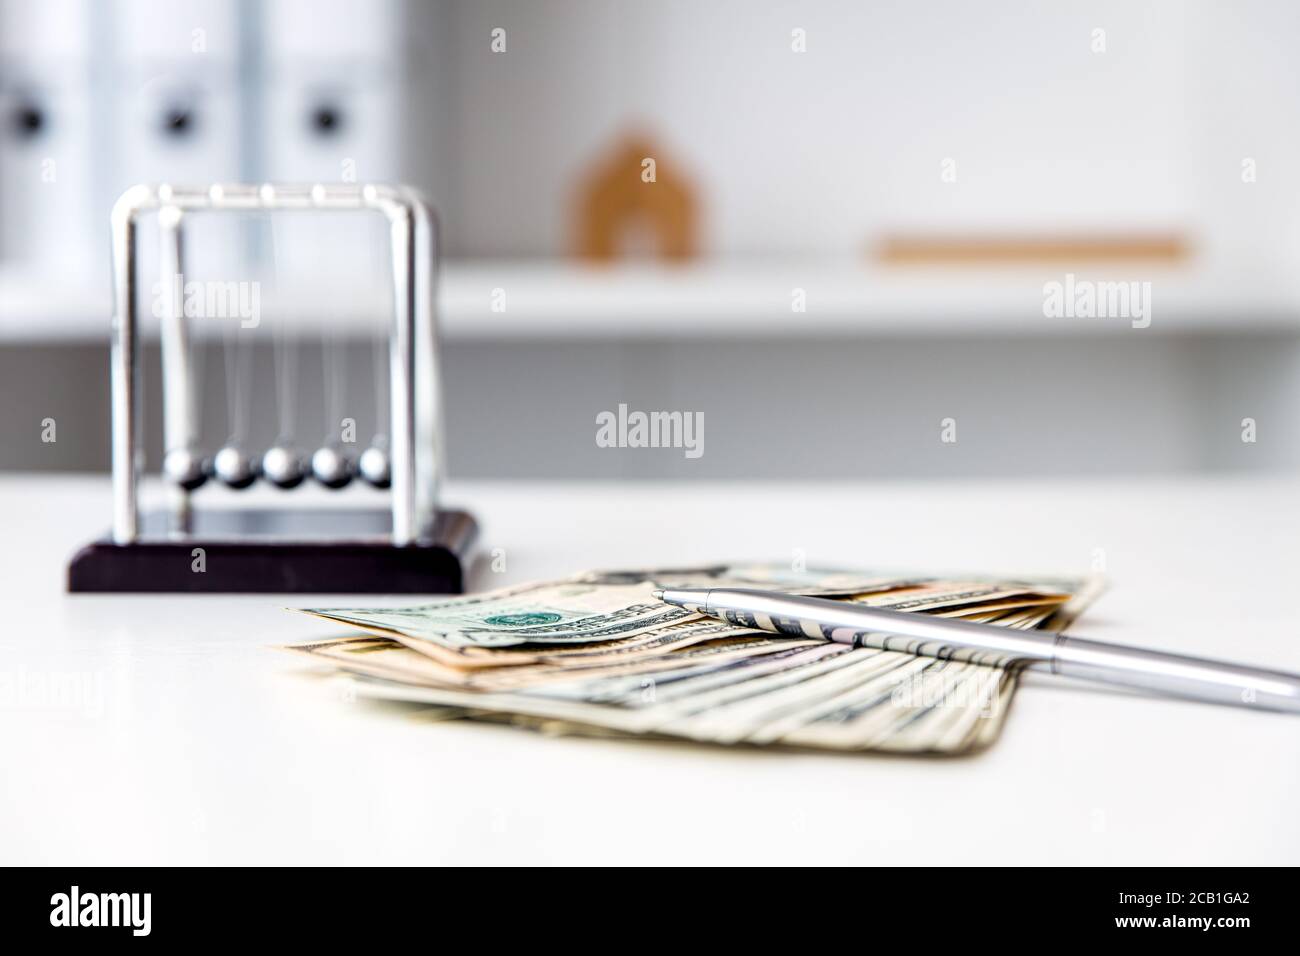 Office workplace and us dollars on a white table, currency and workstation Stock Photo